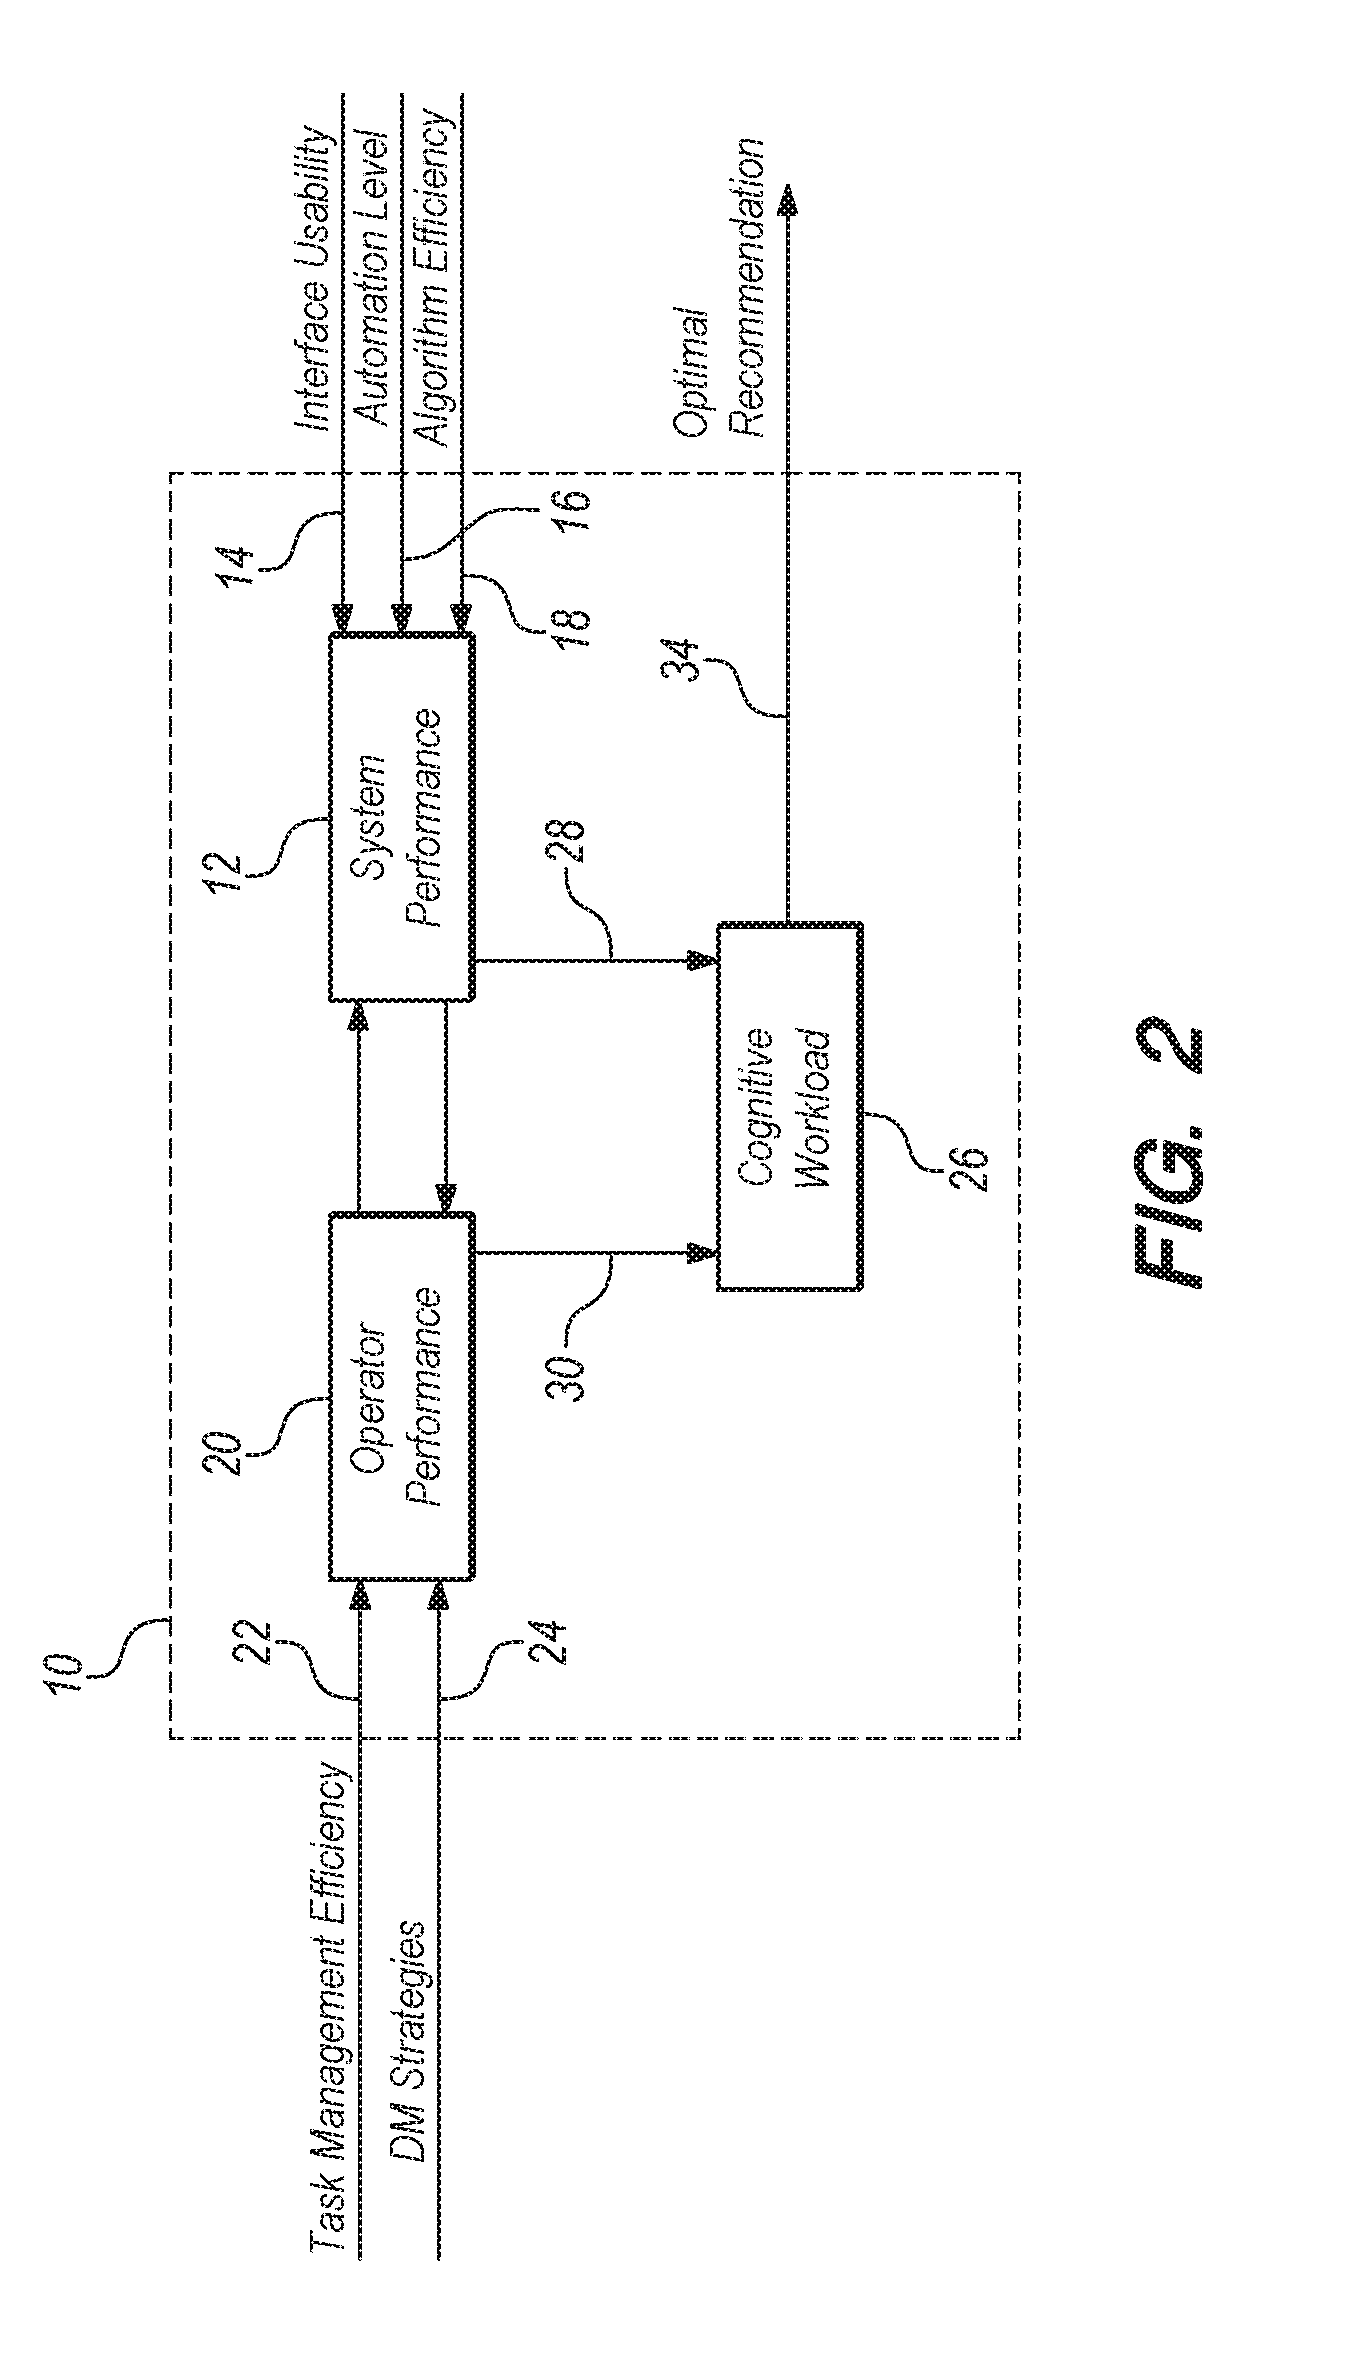 System and Method for Predicting An Adequate Ratio of Unmanned Vehicles to Operators